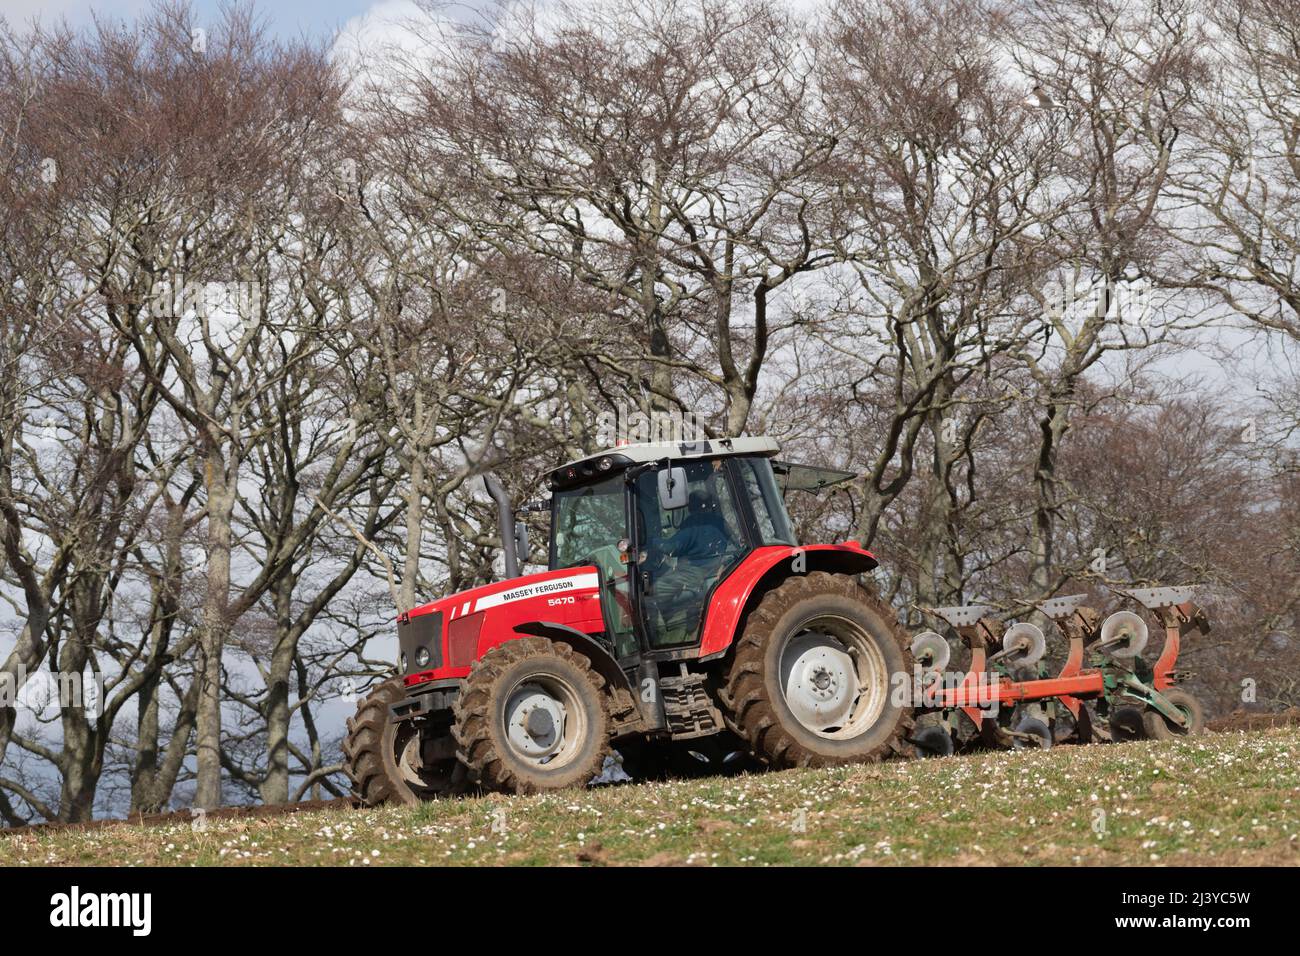 A Farmer Ploughing a Grass Field on a Scottish Farm with a Massey Ferguson 5470 Tractor in Spring Sunshine with Beech Trees in the Background Stock Photo